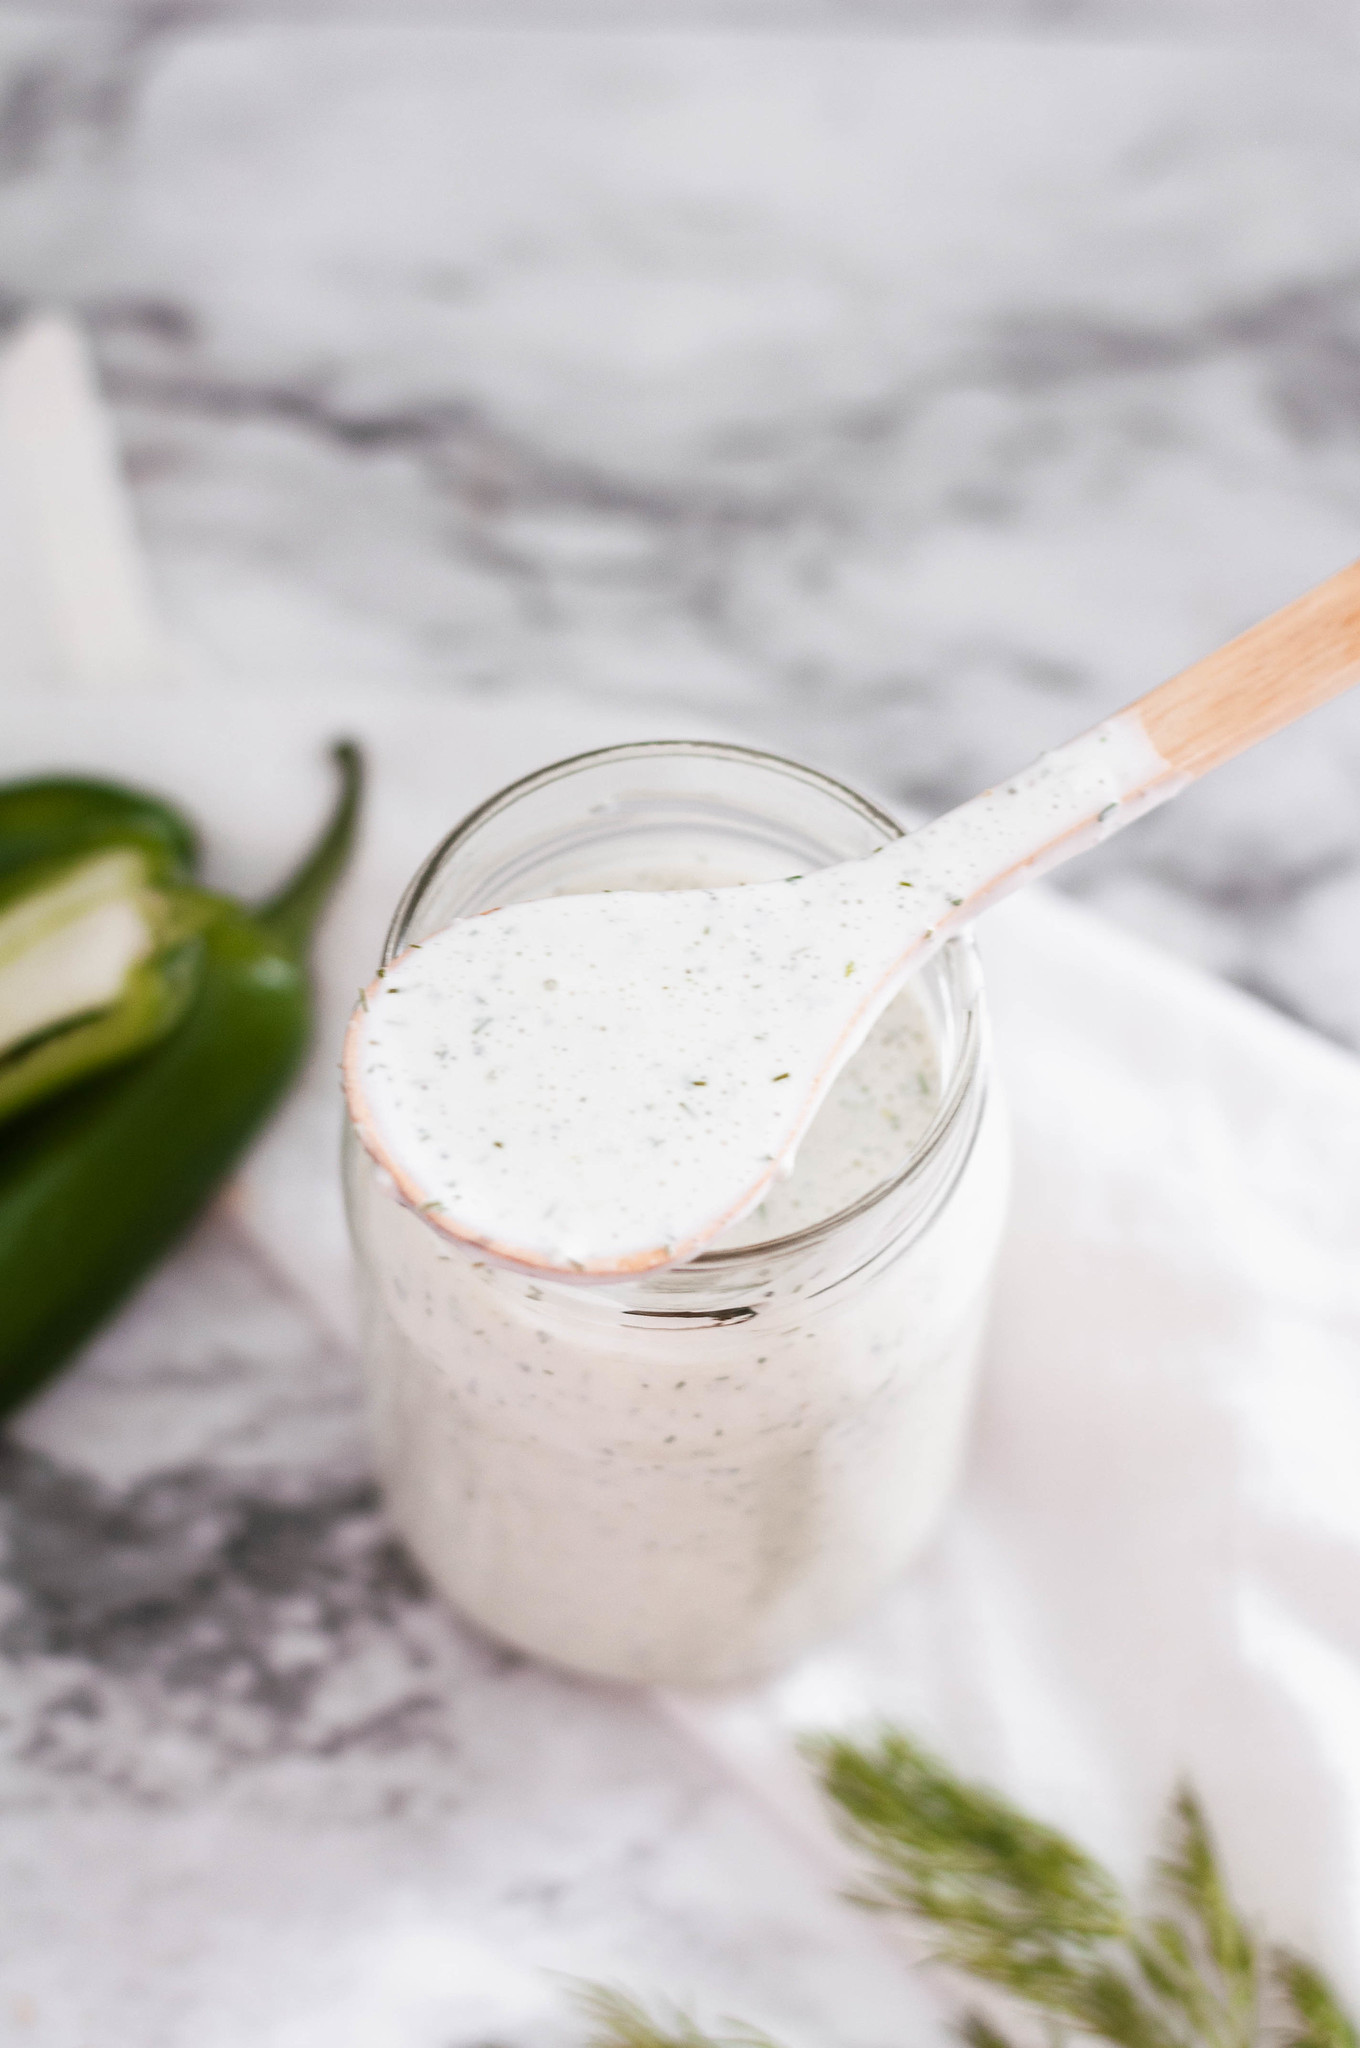 Toss a few ingredients in the food processor (or blender) and in minutes you have a spicy, fresh homemade jalapeno ranch dressing perfect for salads and all your dipping needs.